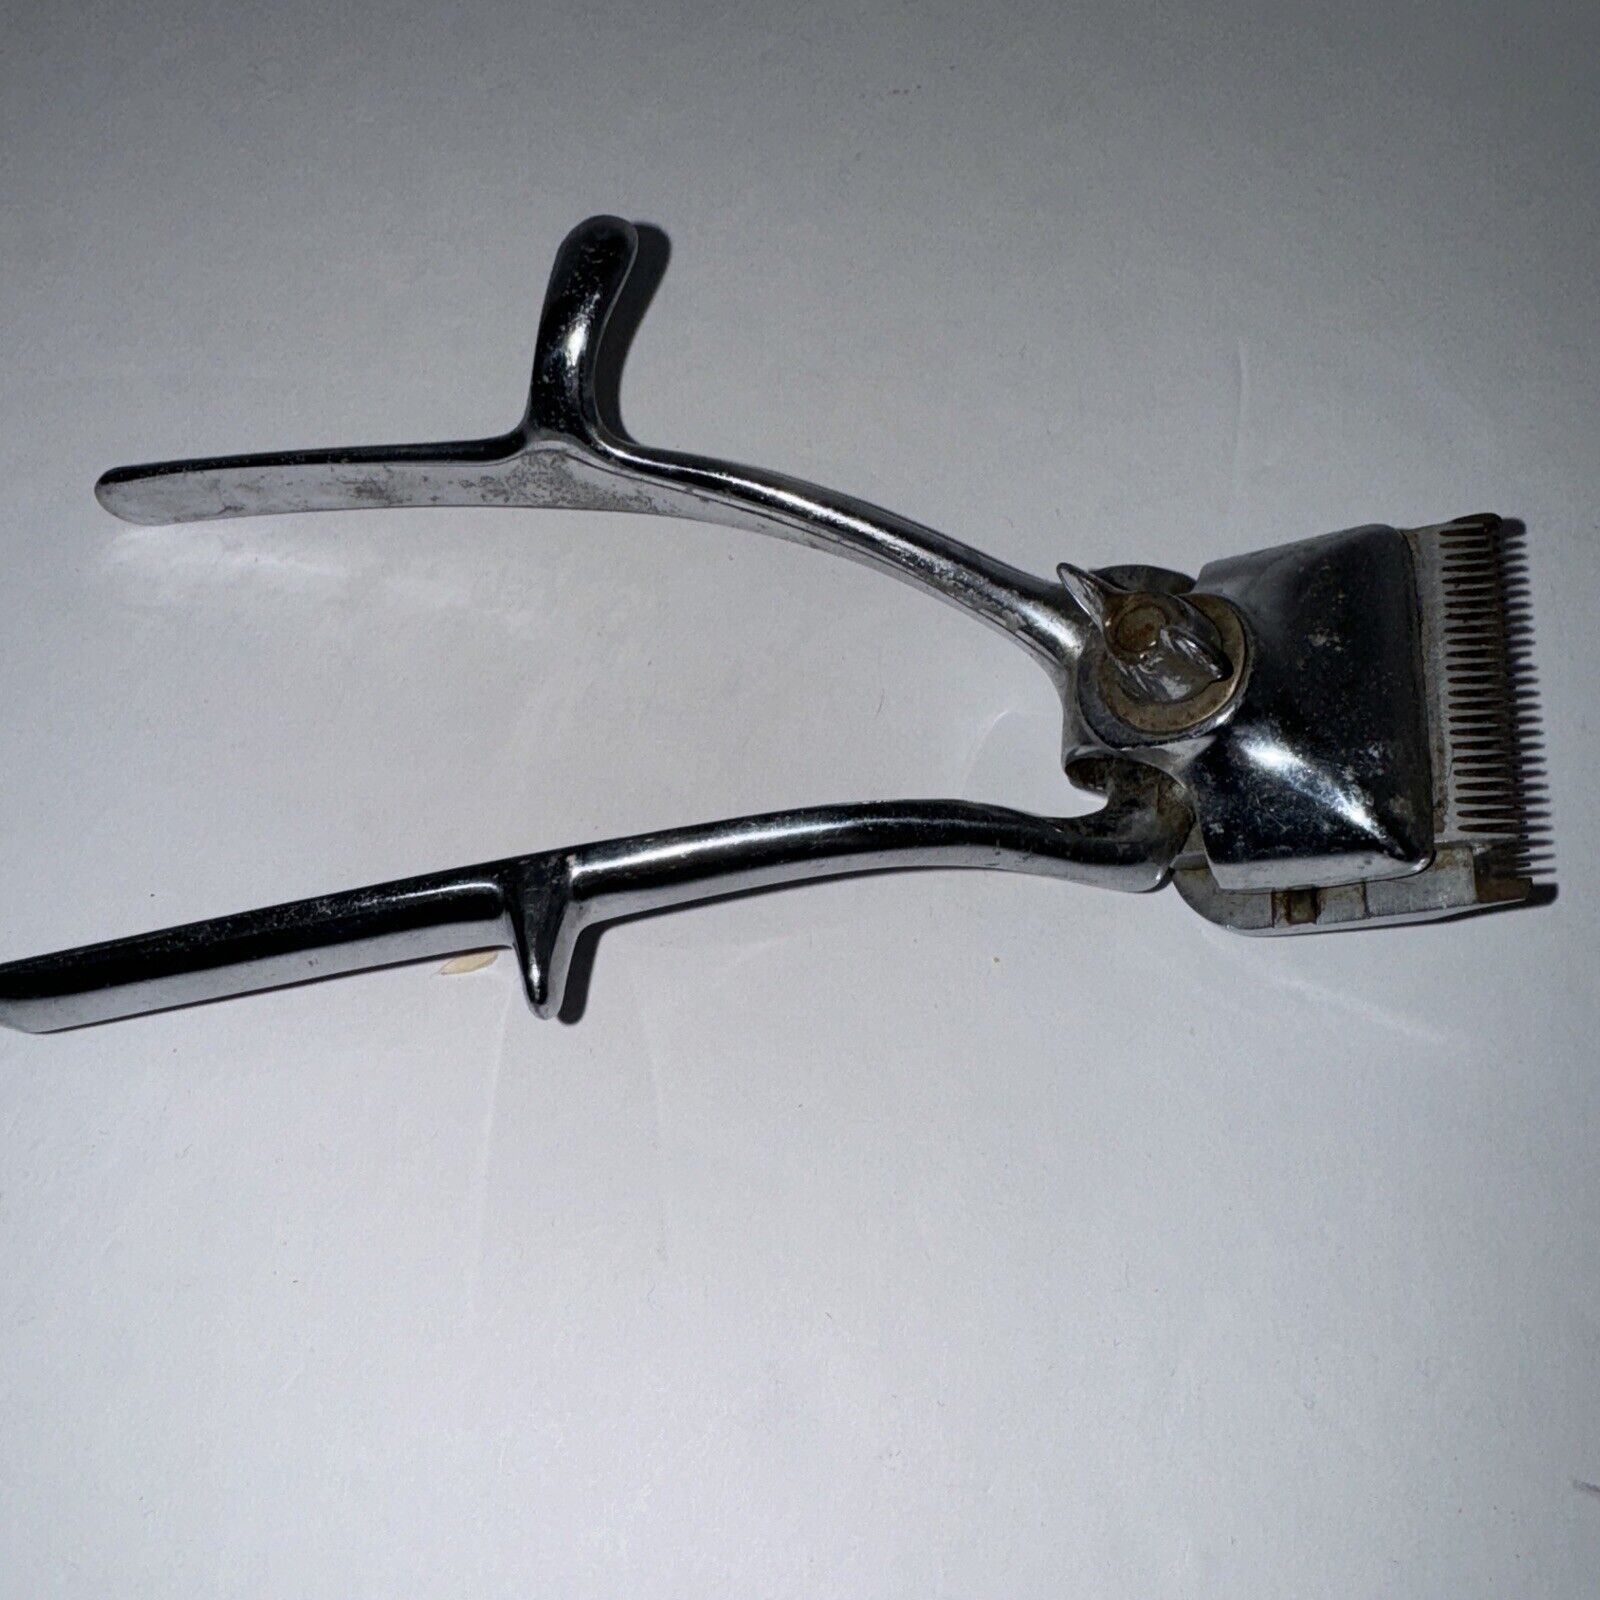 VINTAGE HAIR SQUEEZE CLIPPERS  PRIESTS COLUMBIAN USA SMALL BARBER HAND HELD